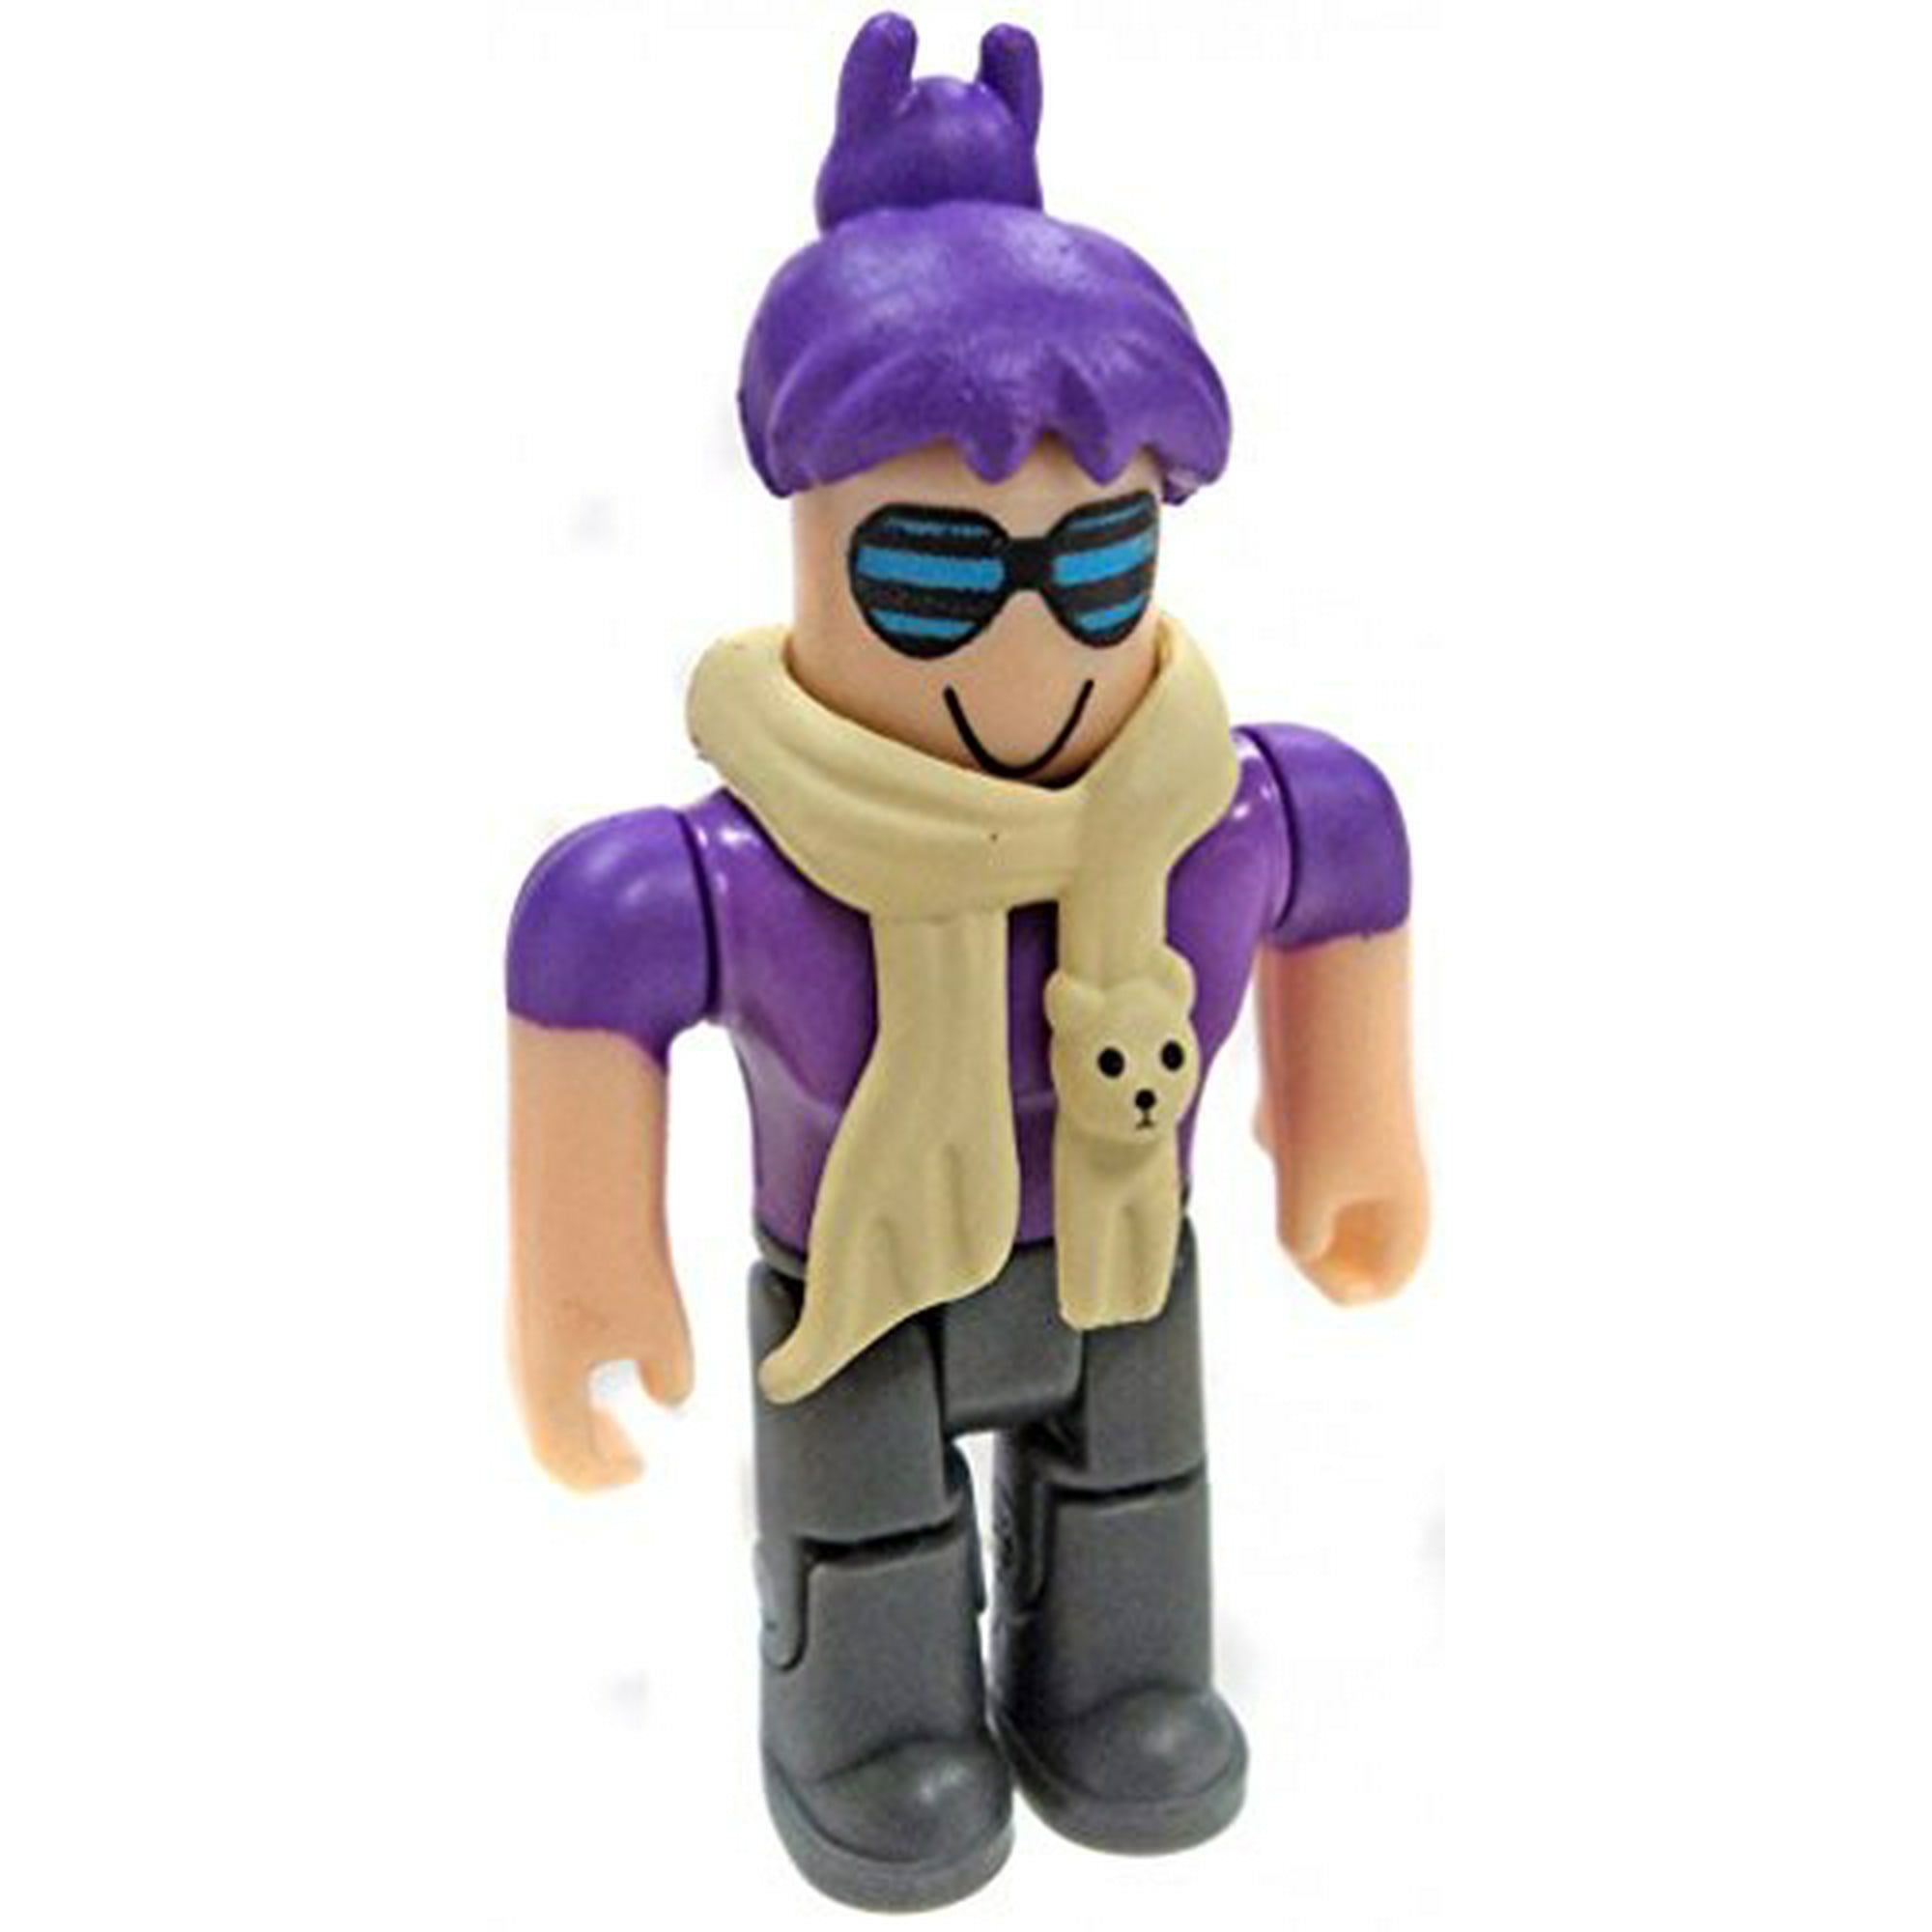 Roblox Series 2 Brighteyes Action Figure Mystery Box Virtual - roblox action figure brighteyes virtual code series 2